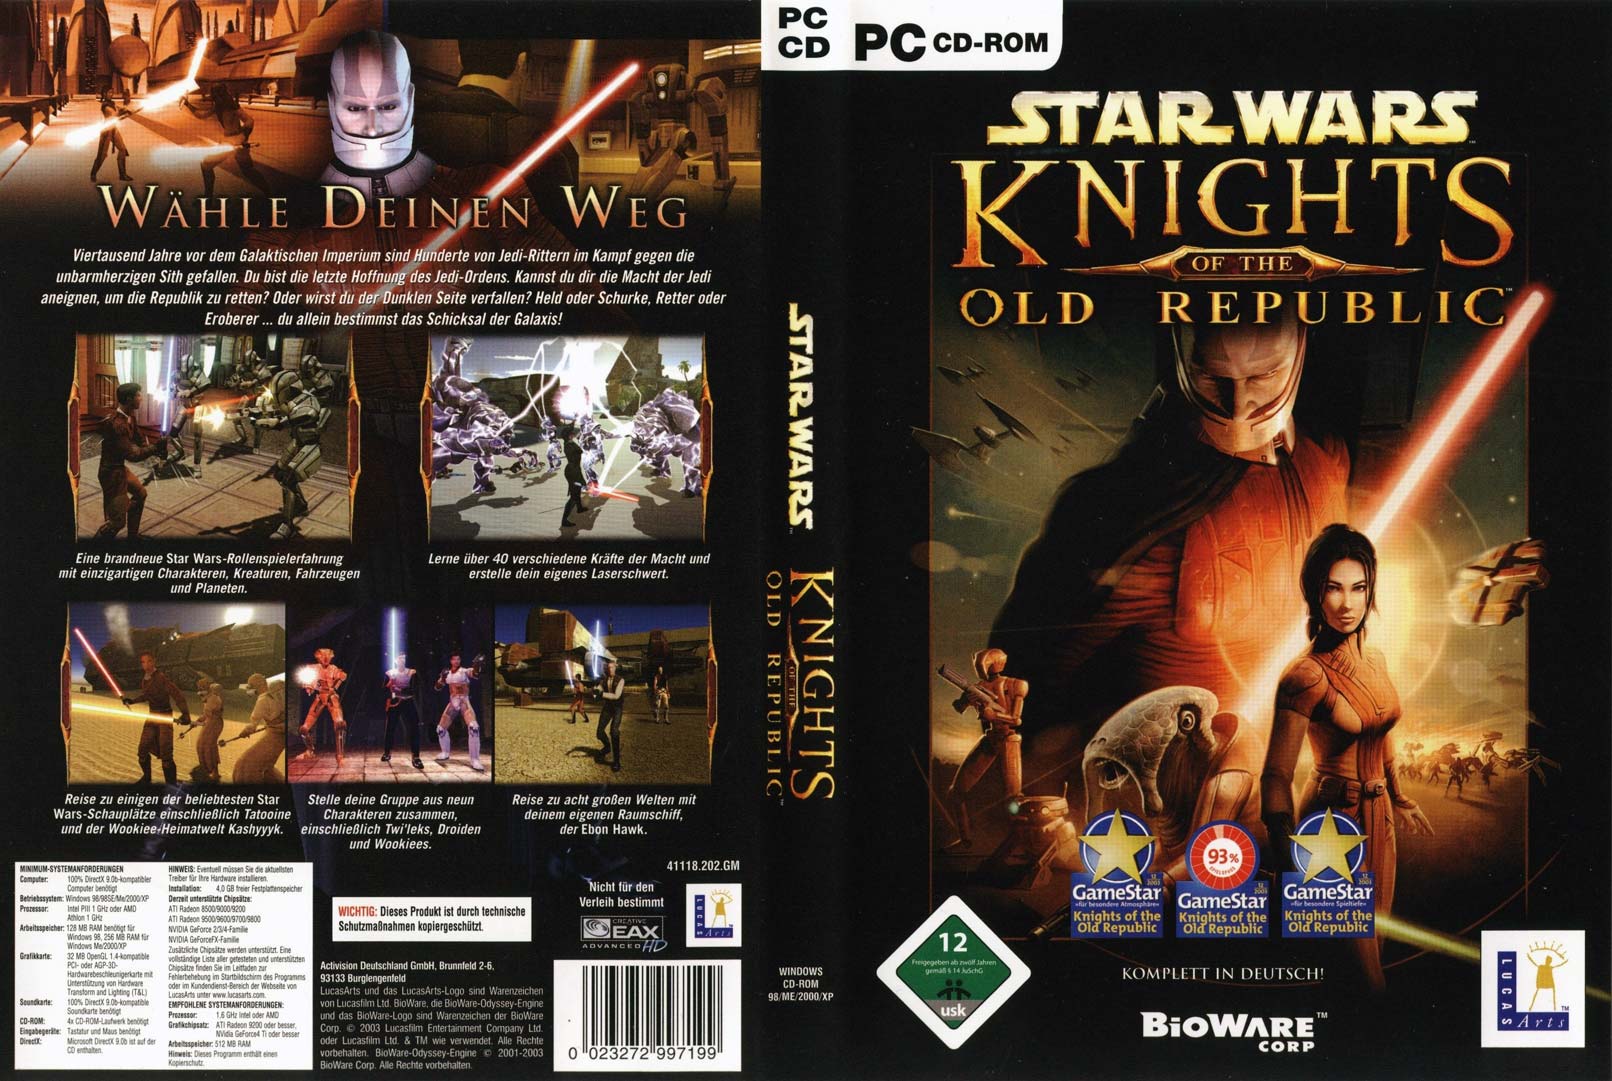 Star wars knights of the old republic русификатор steam фото 106